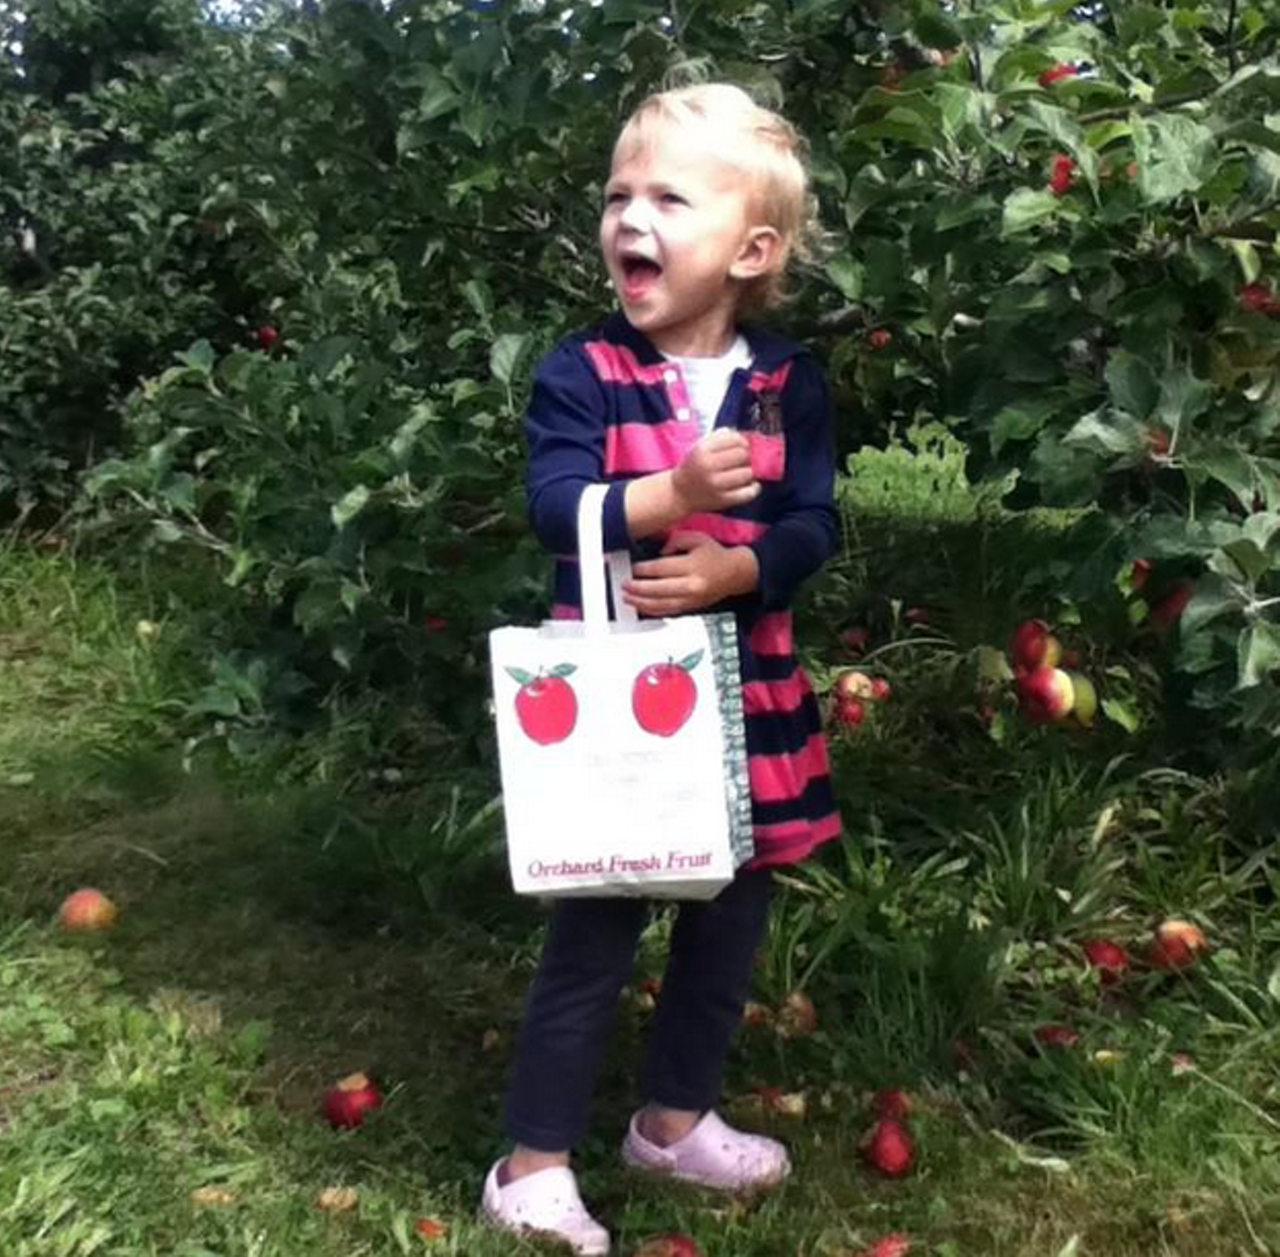 The former Pioneer Trail Orchard changed its name a few years back but continues to offer 23 varieties of apples (you can pick them yourself on weekends through October), plus Bartlett pears, red raspberries and cider pressed on site. Stop in at 6313 Pioneer Trail, Hiram, 330.569.7464.